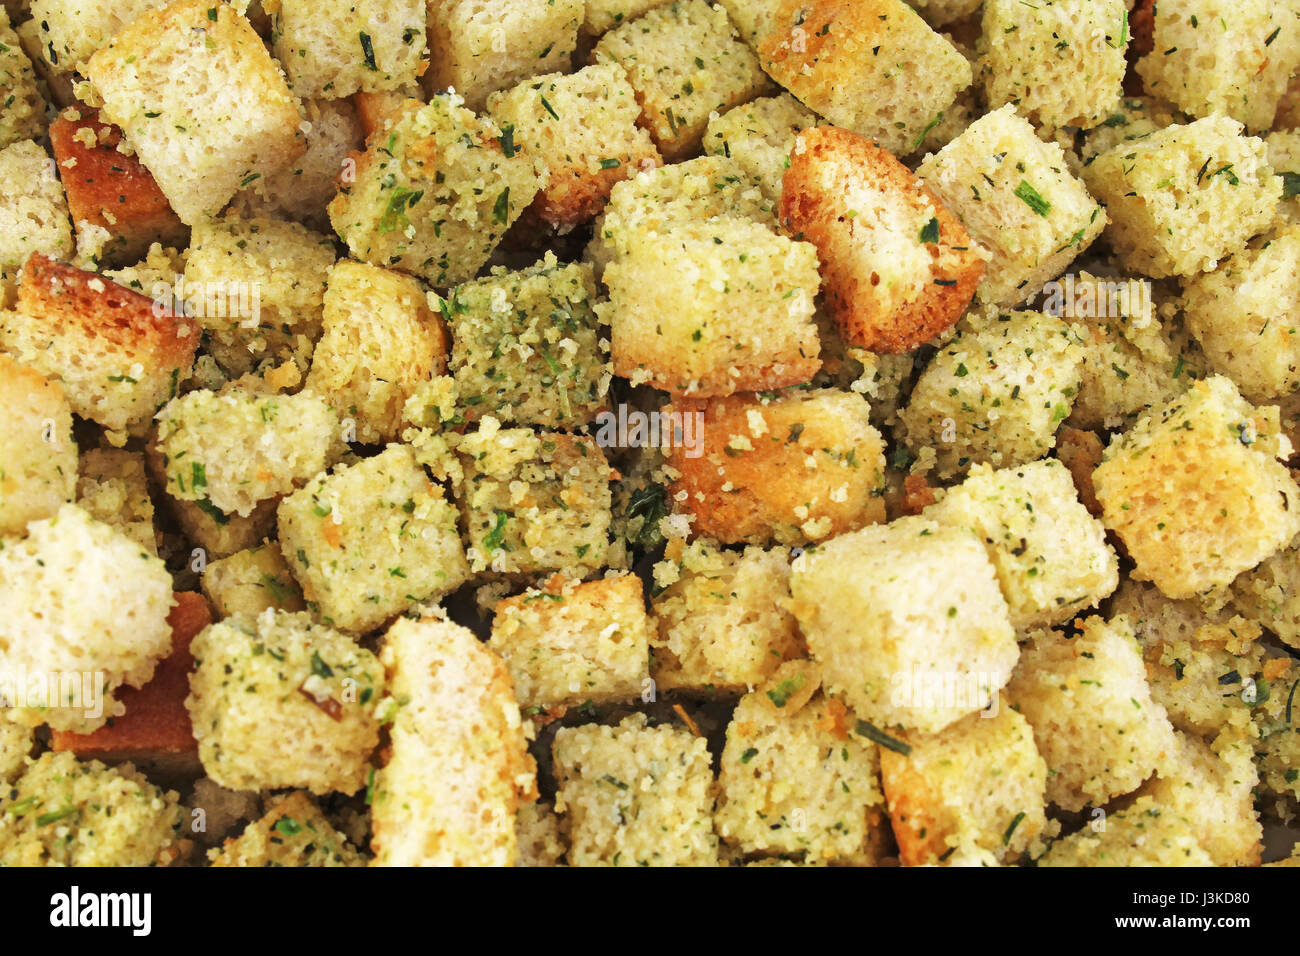 Soup balls. Soup pearls texture. Fried batter pearls ('Backerbsen') - Bavarian soup garnish specialty. Soup bread balls croutons crouton food photo Stock Photo